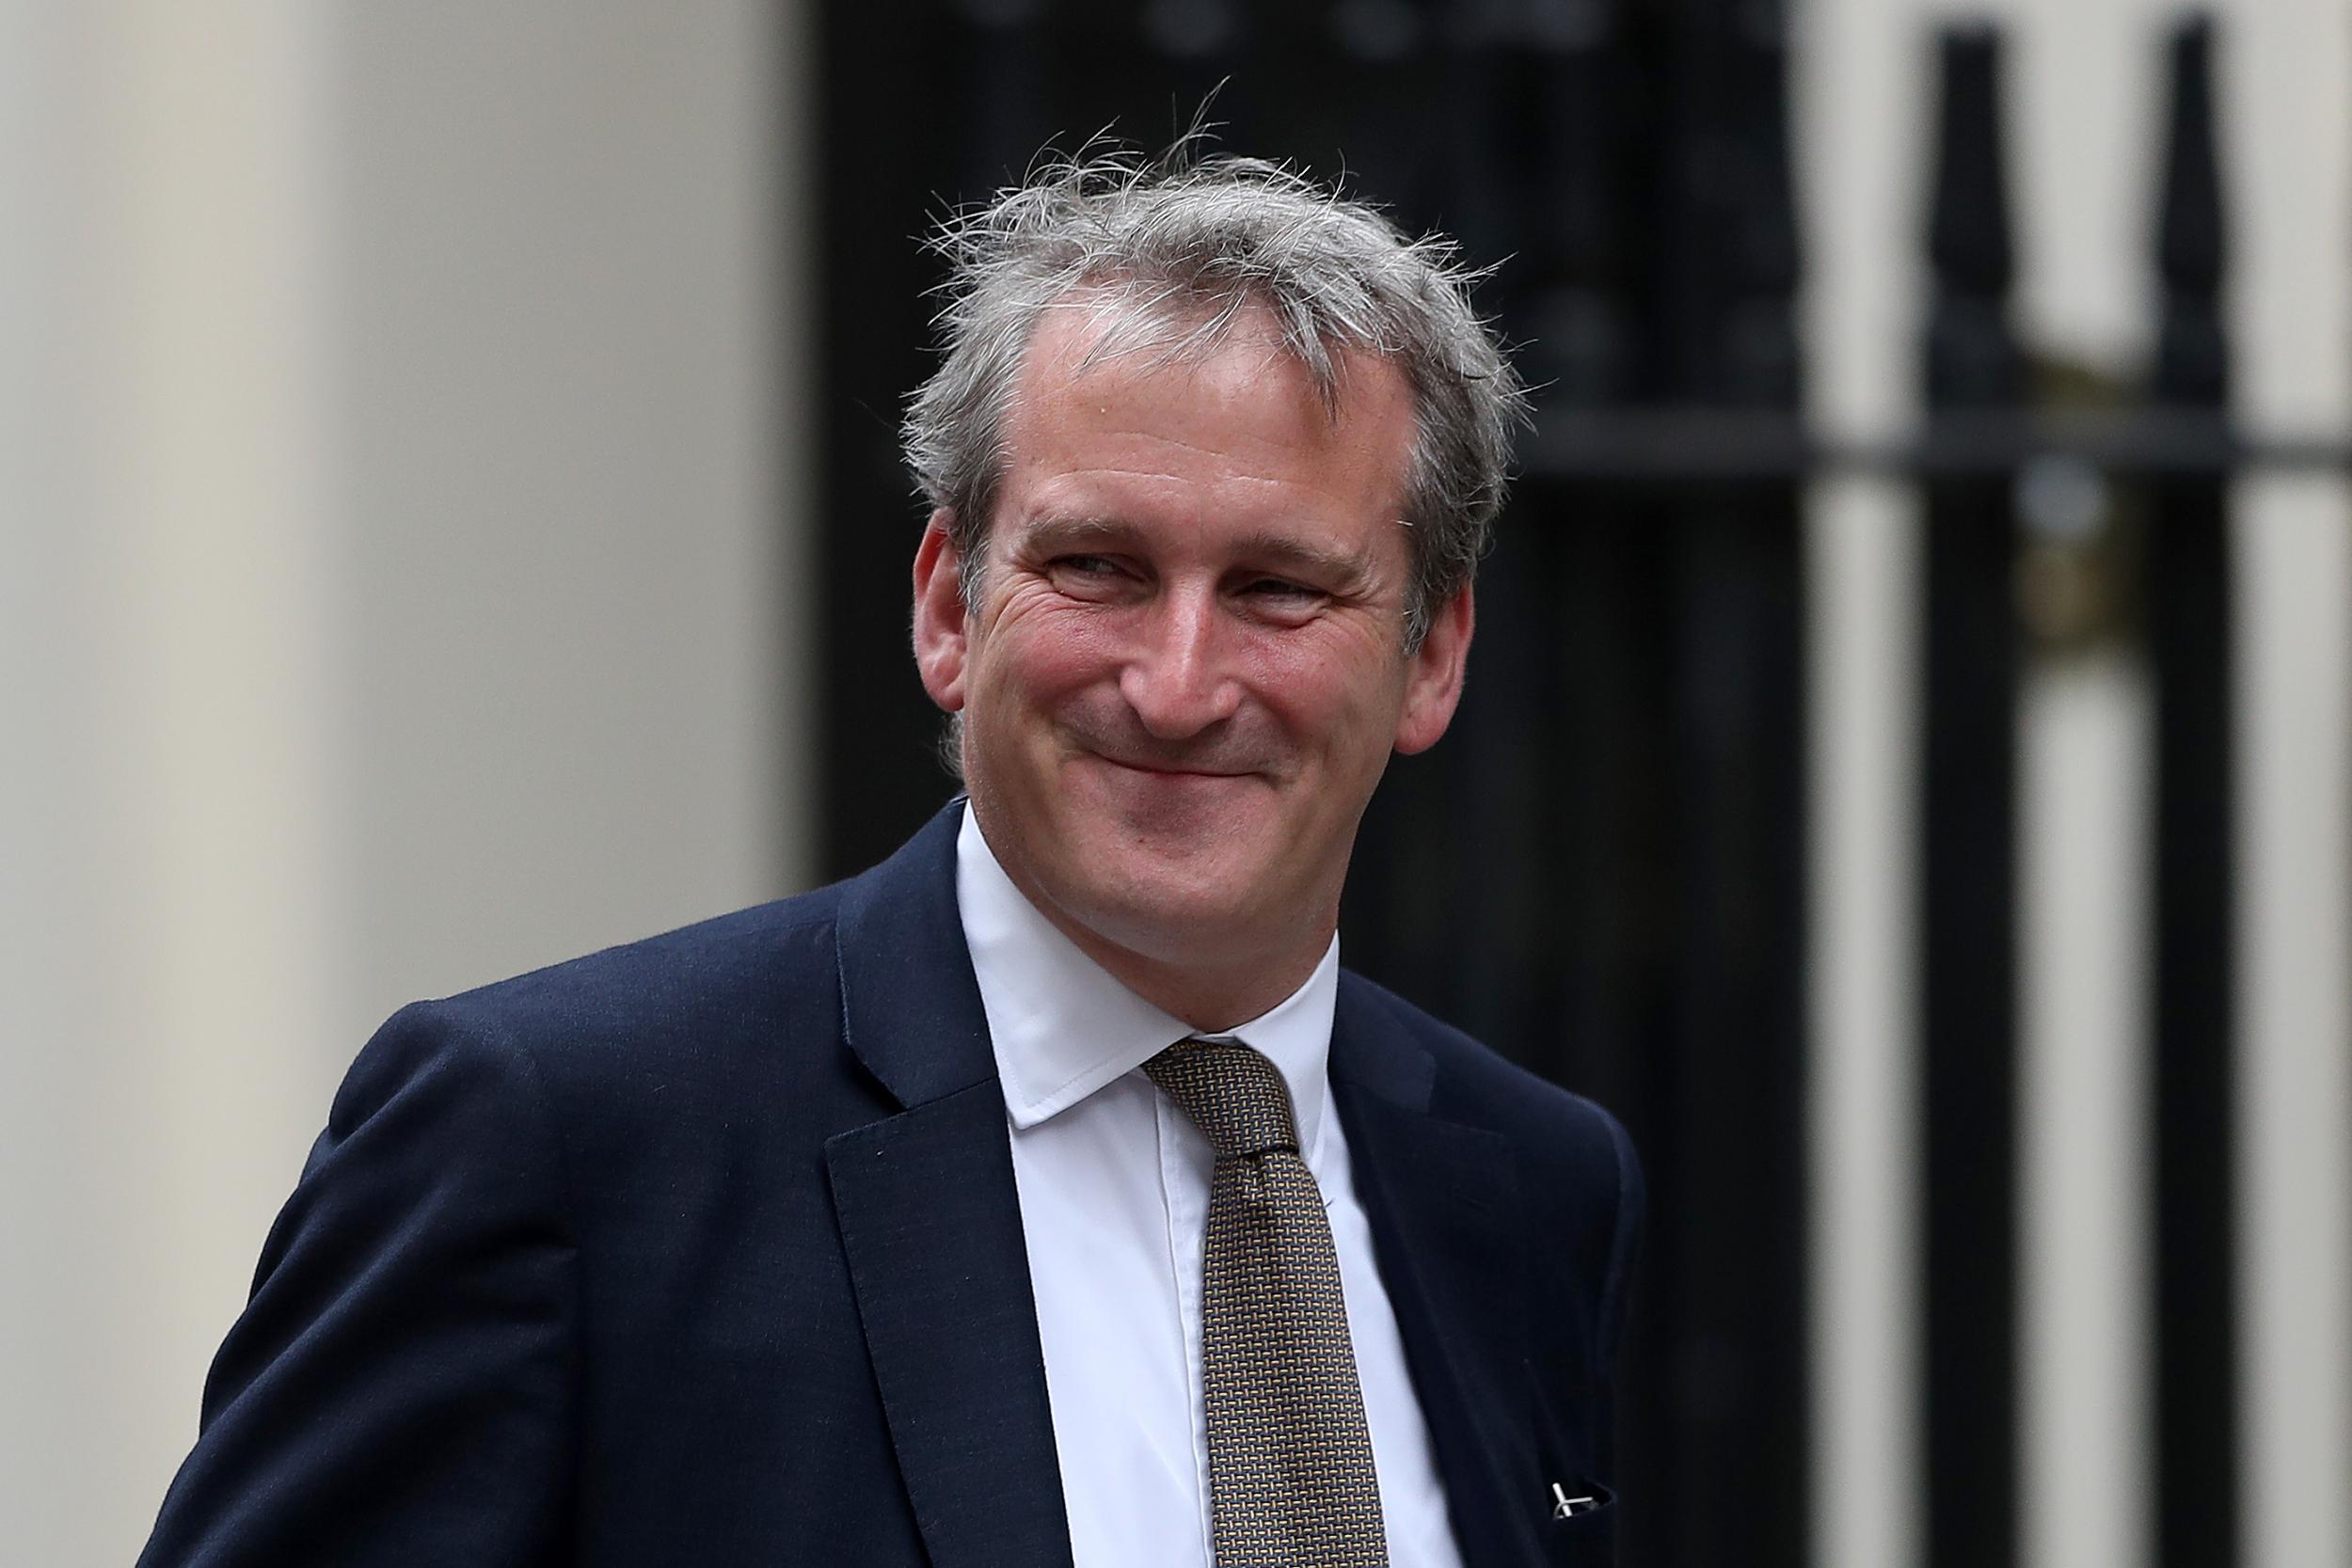 Damian Hinds has called on parents to put their phones down